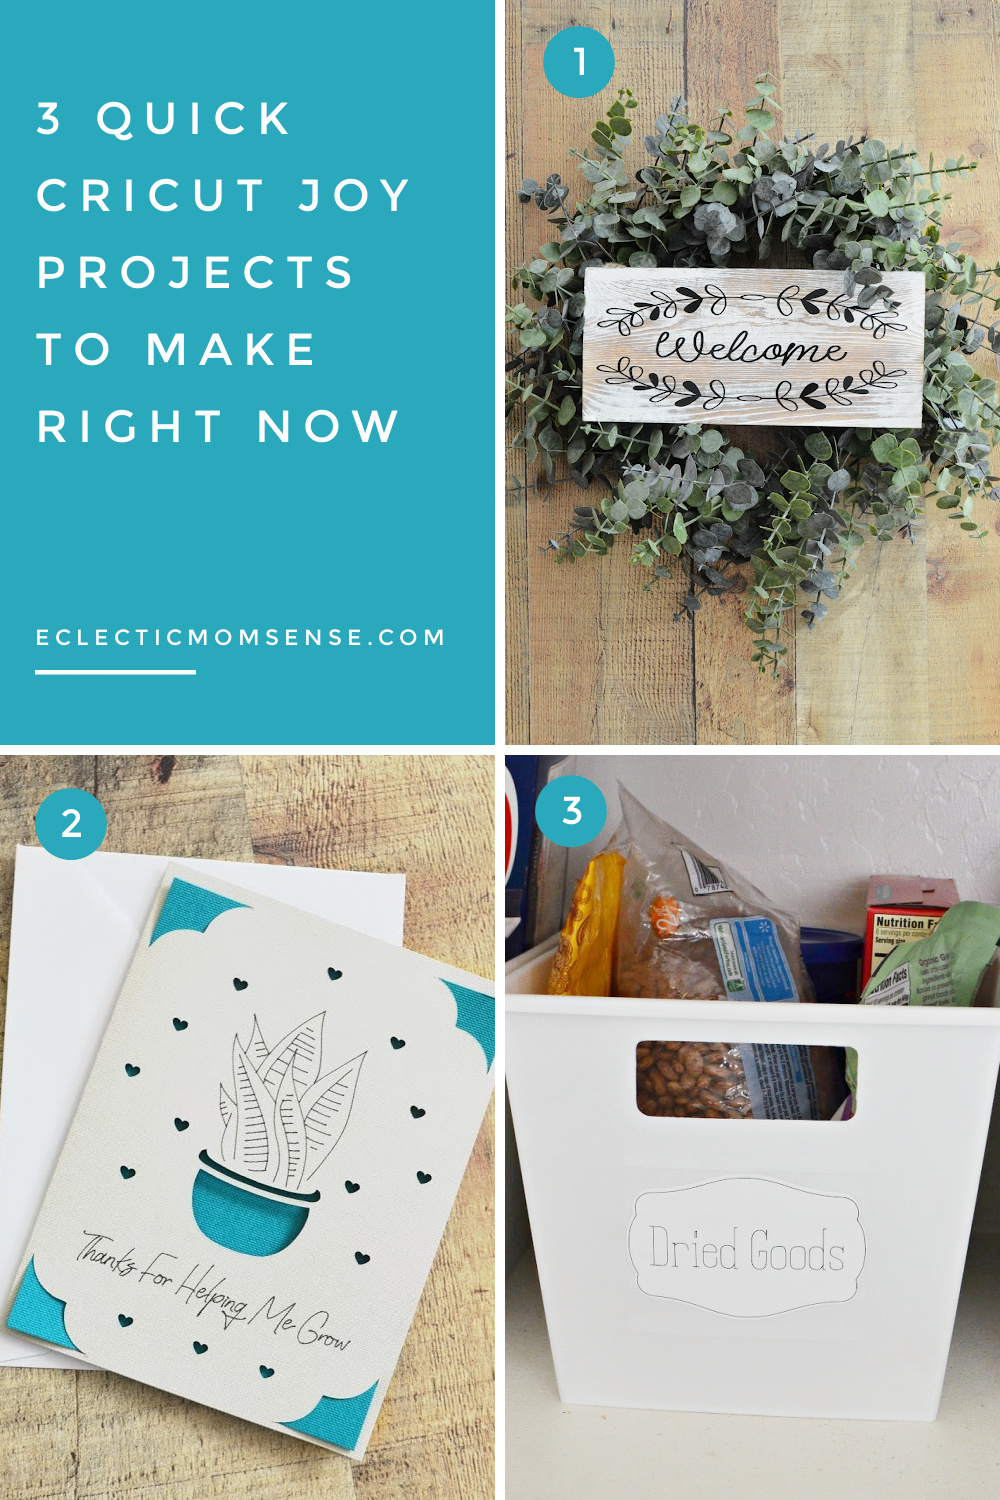 Pin on Cricut projects